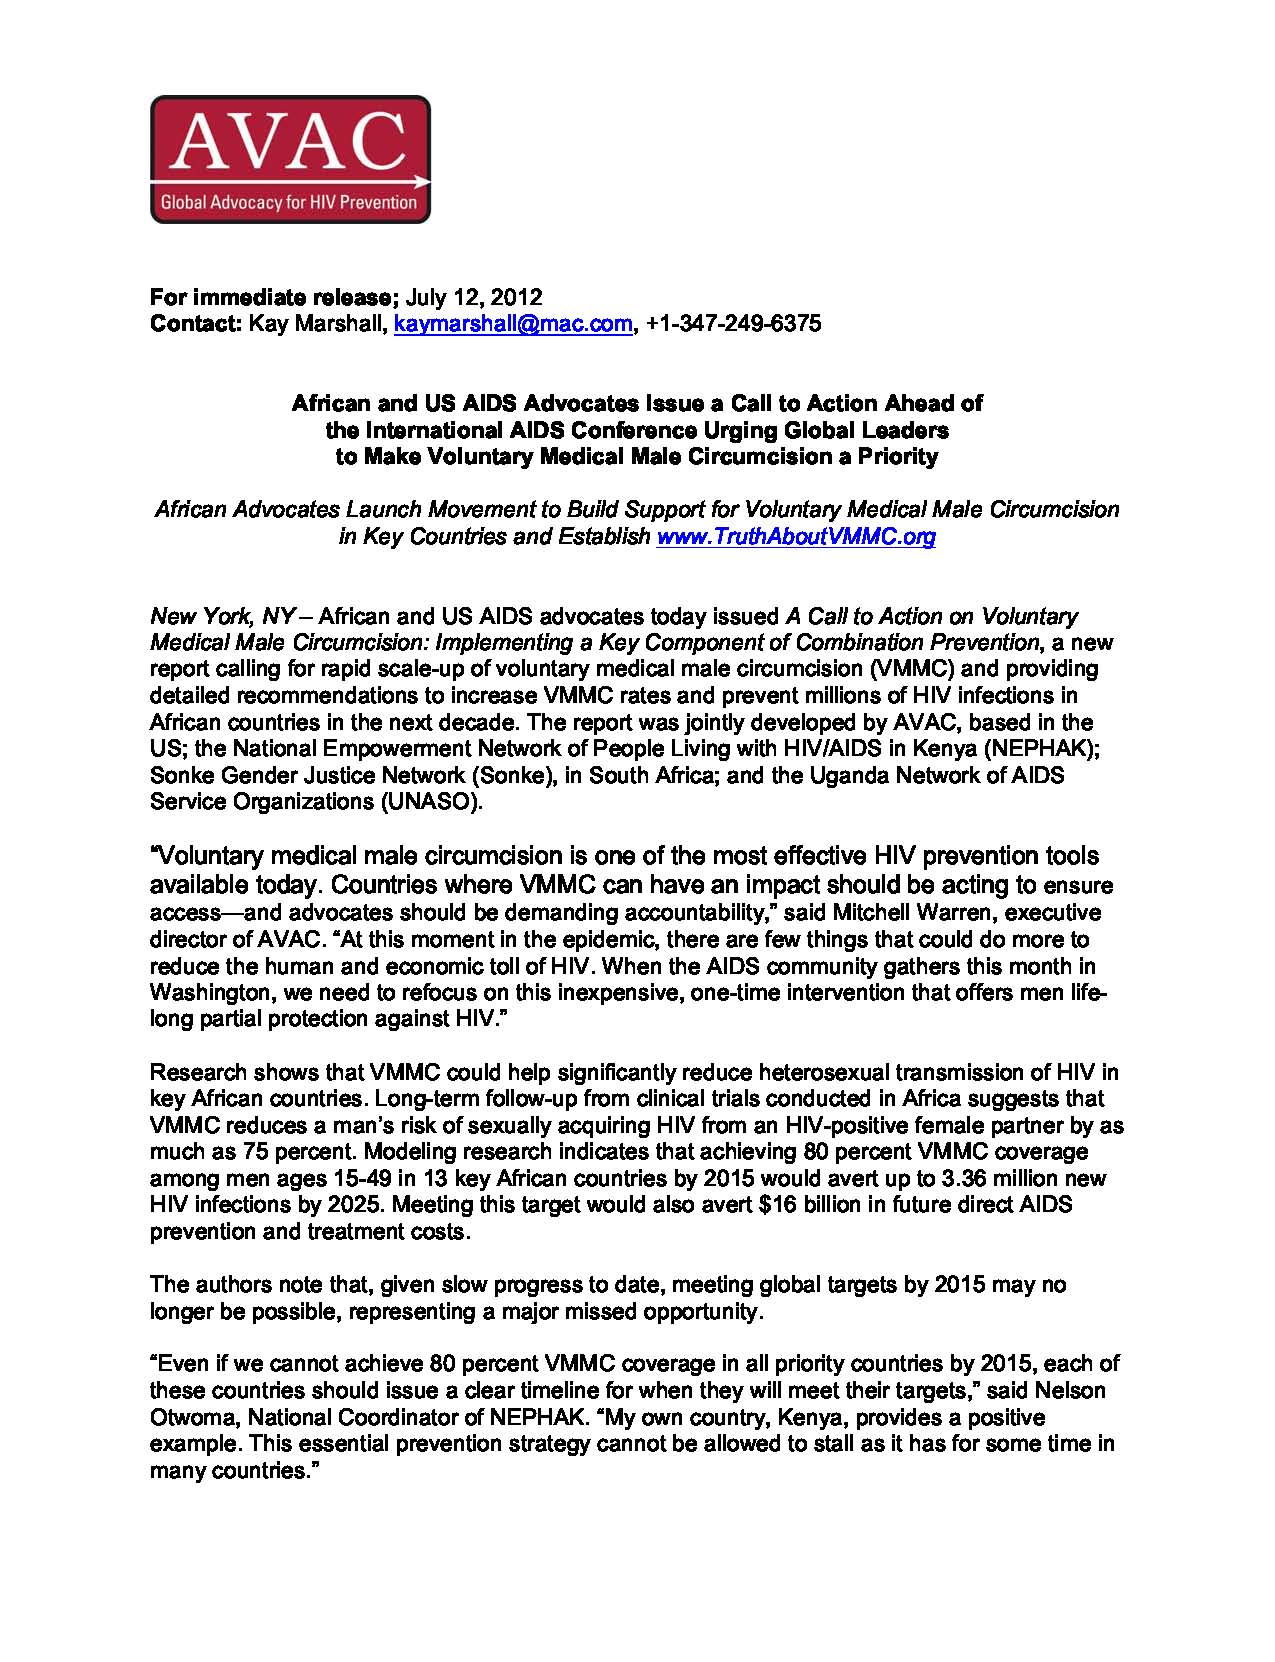 Call to Action Report Press Release